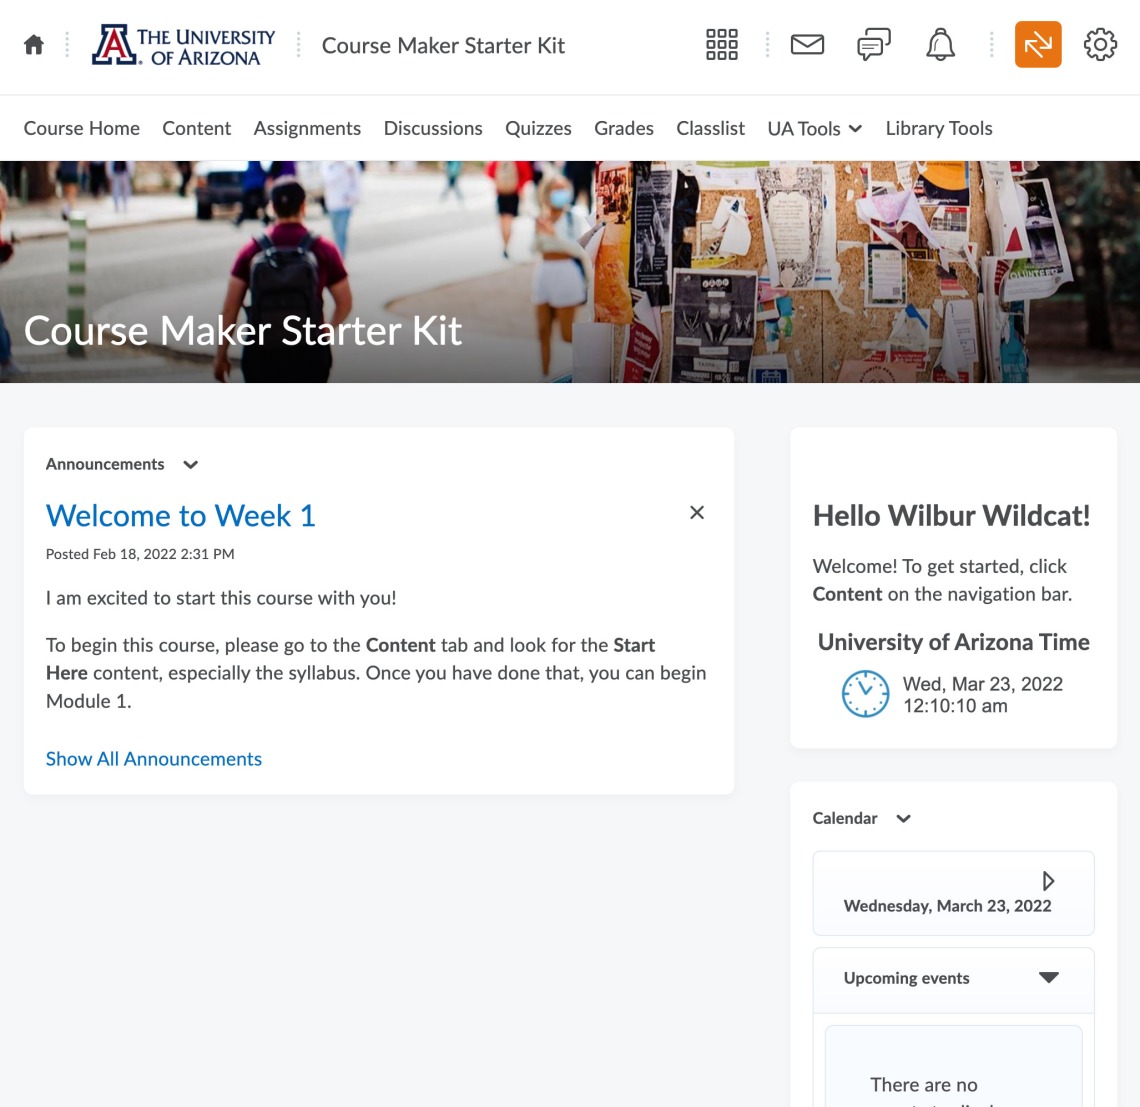 Course Home consists of a banner, welcome widget, announcement, and calendar.